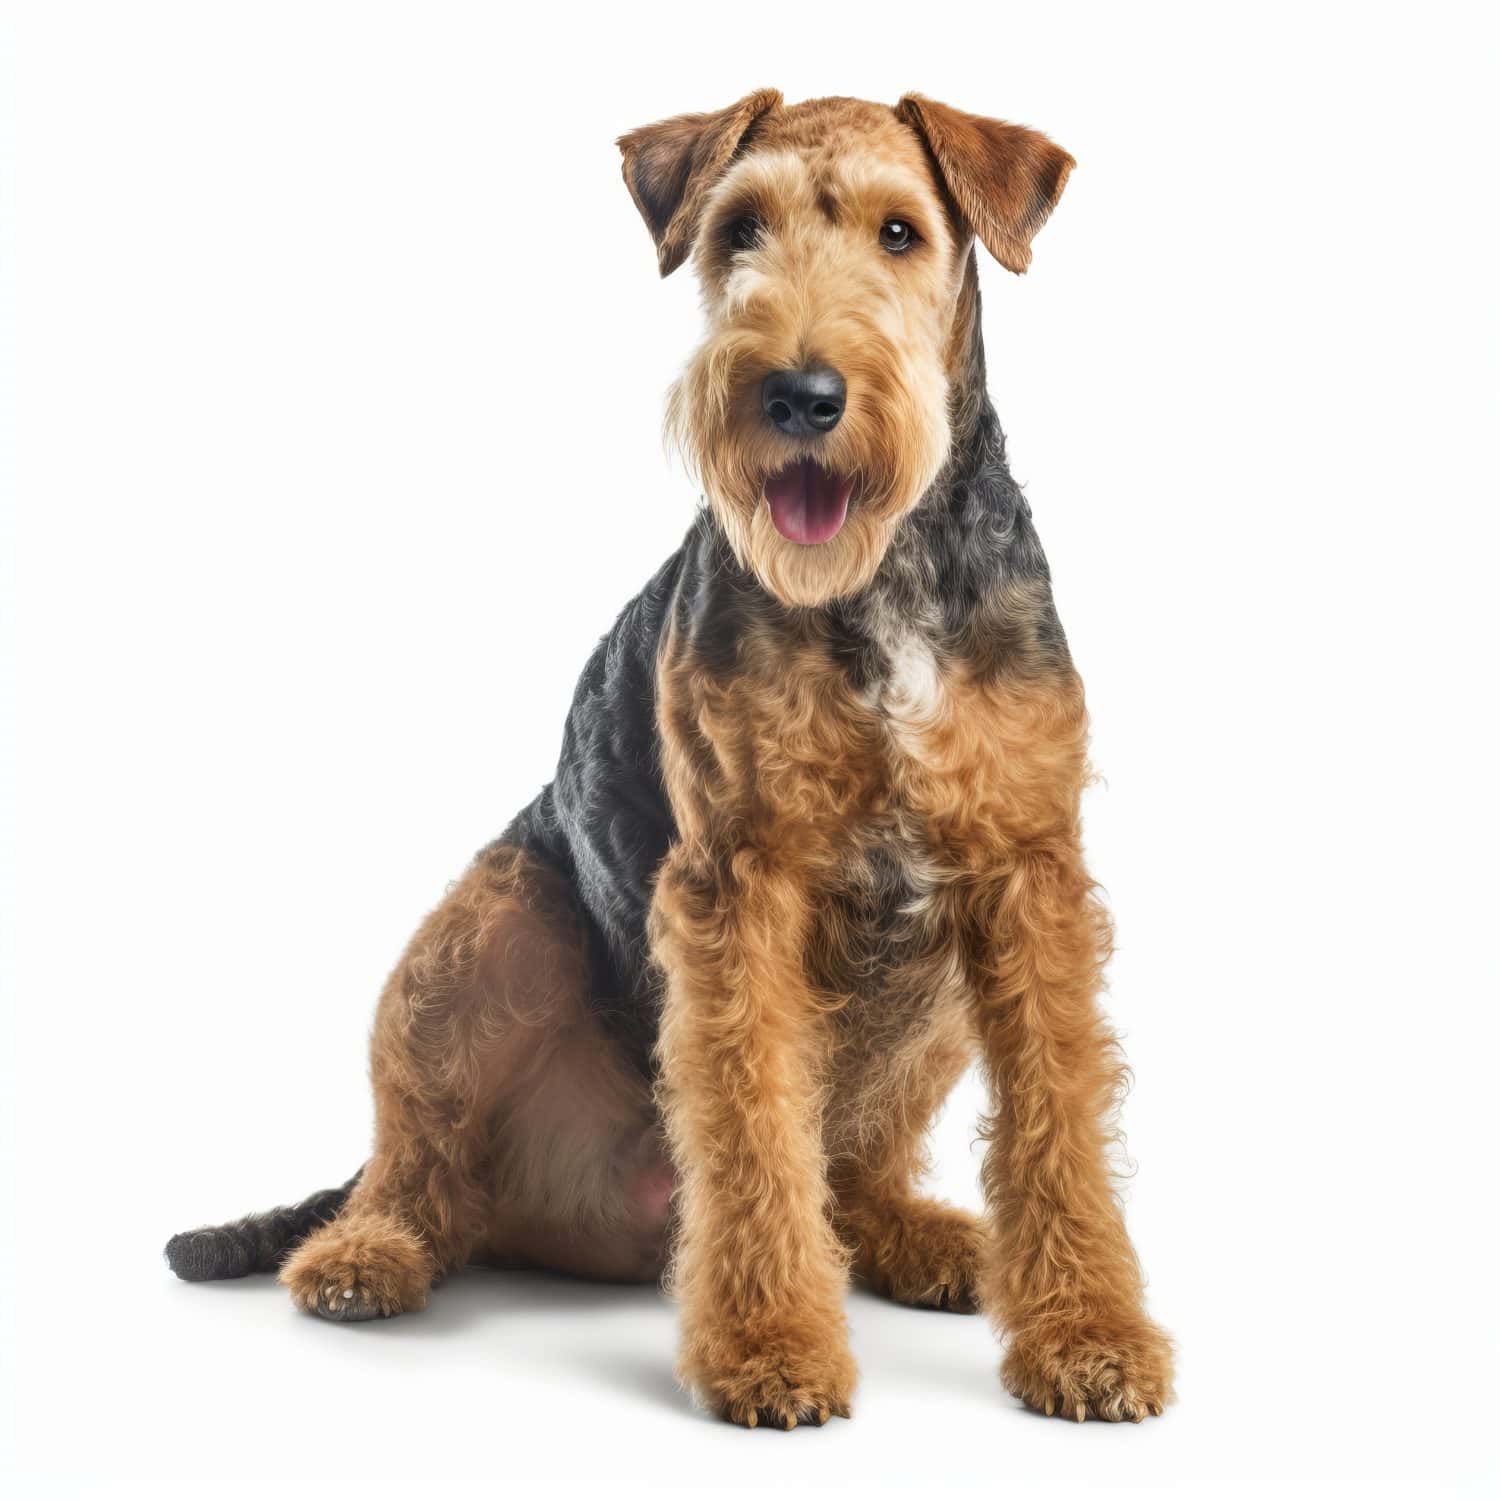 Airedale Terrier Full body facing forward clear with white background,High quality photo